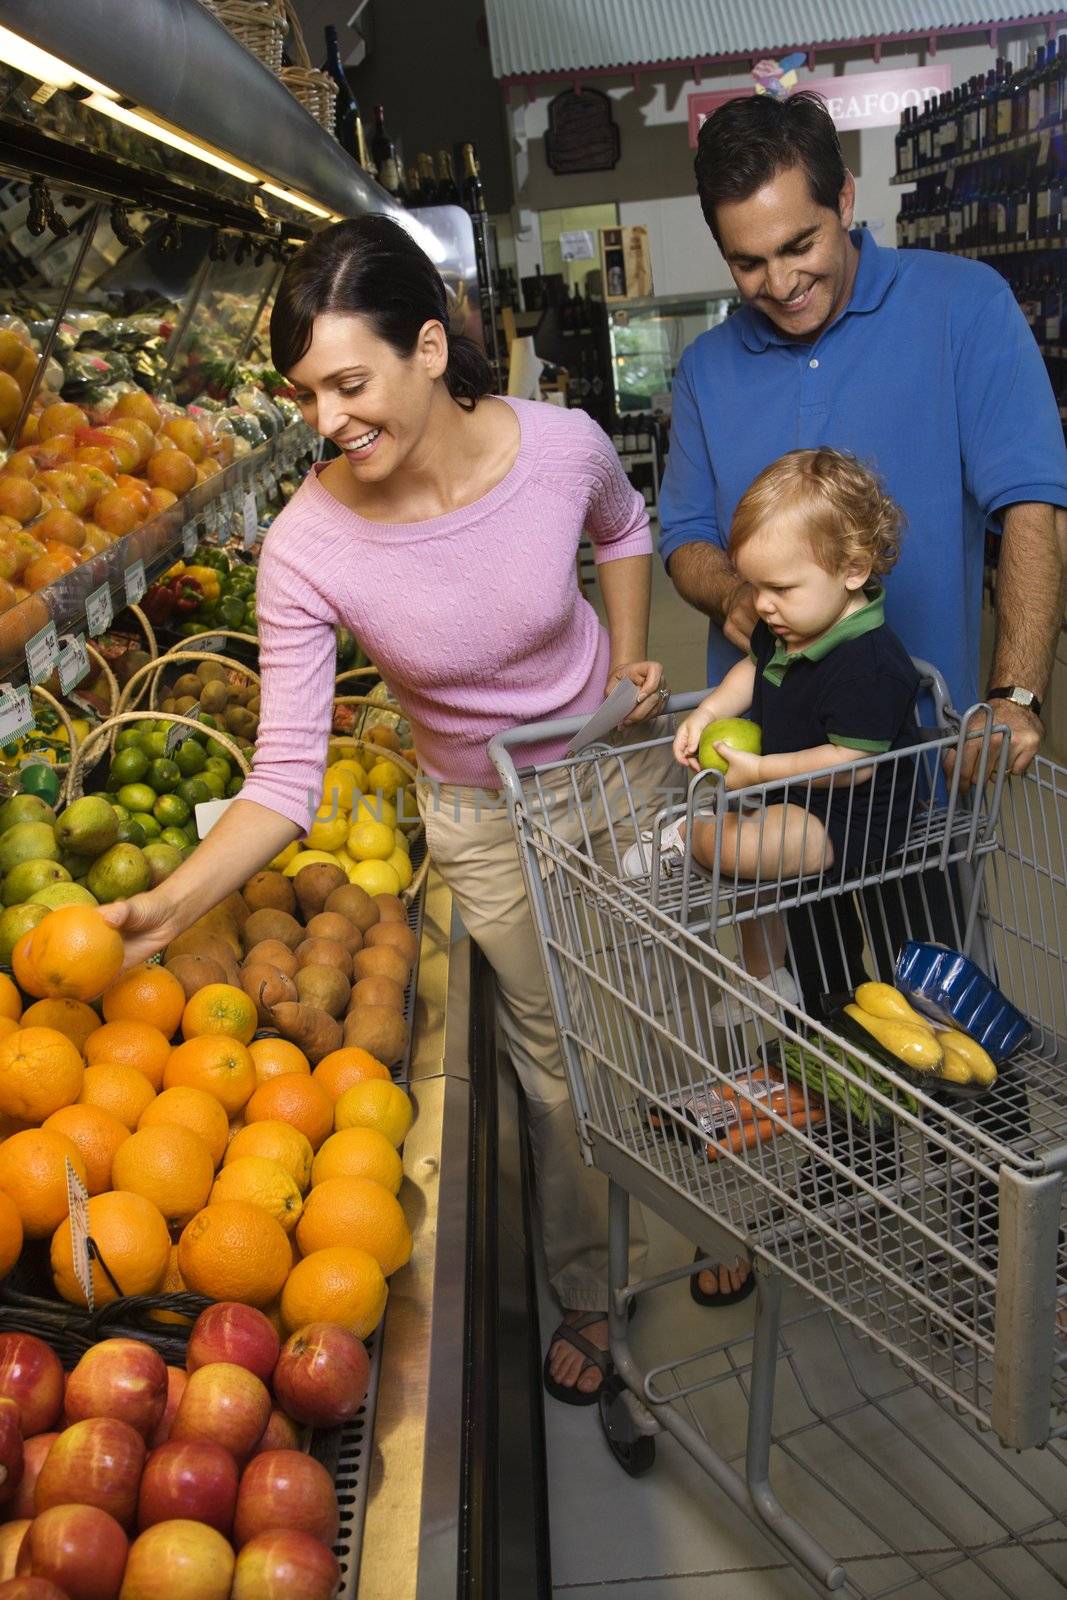 Caucasian mid-adult parents grocery shopping for fruit with male toddler.